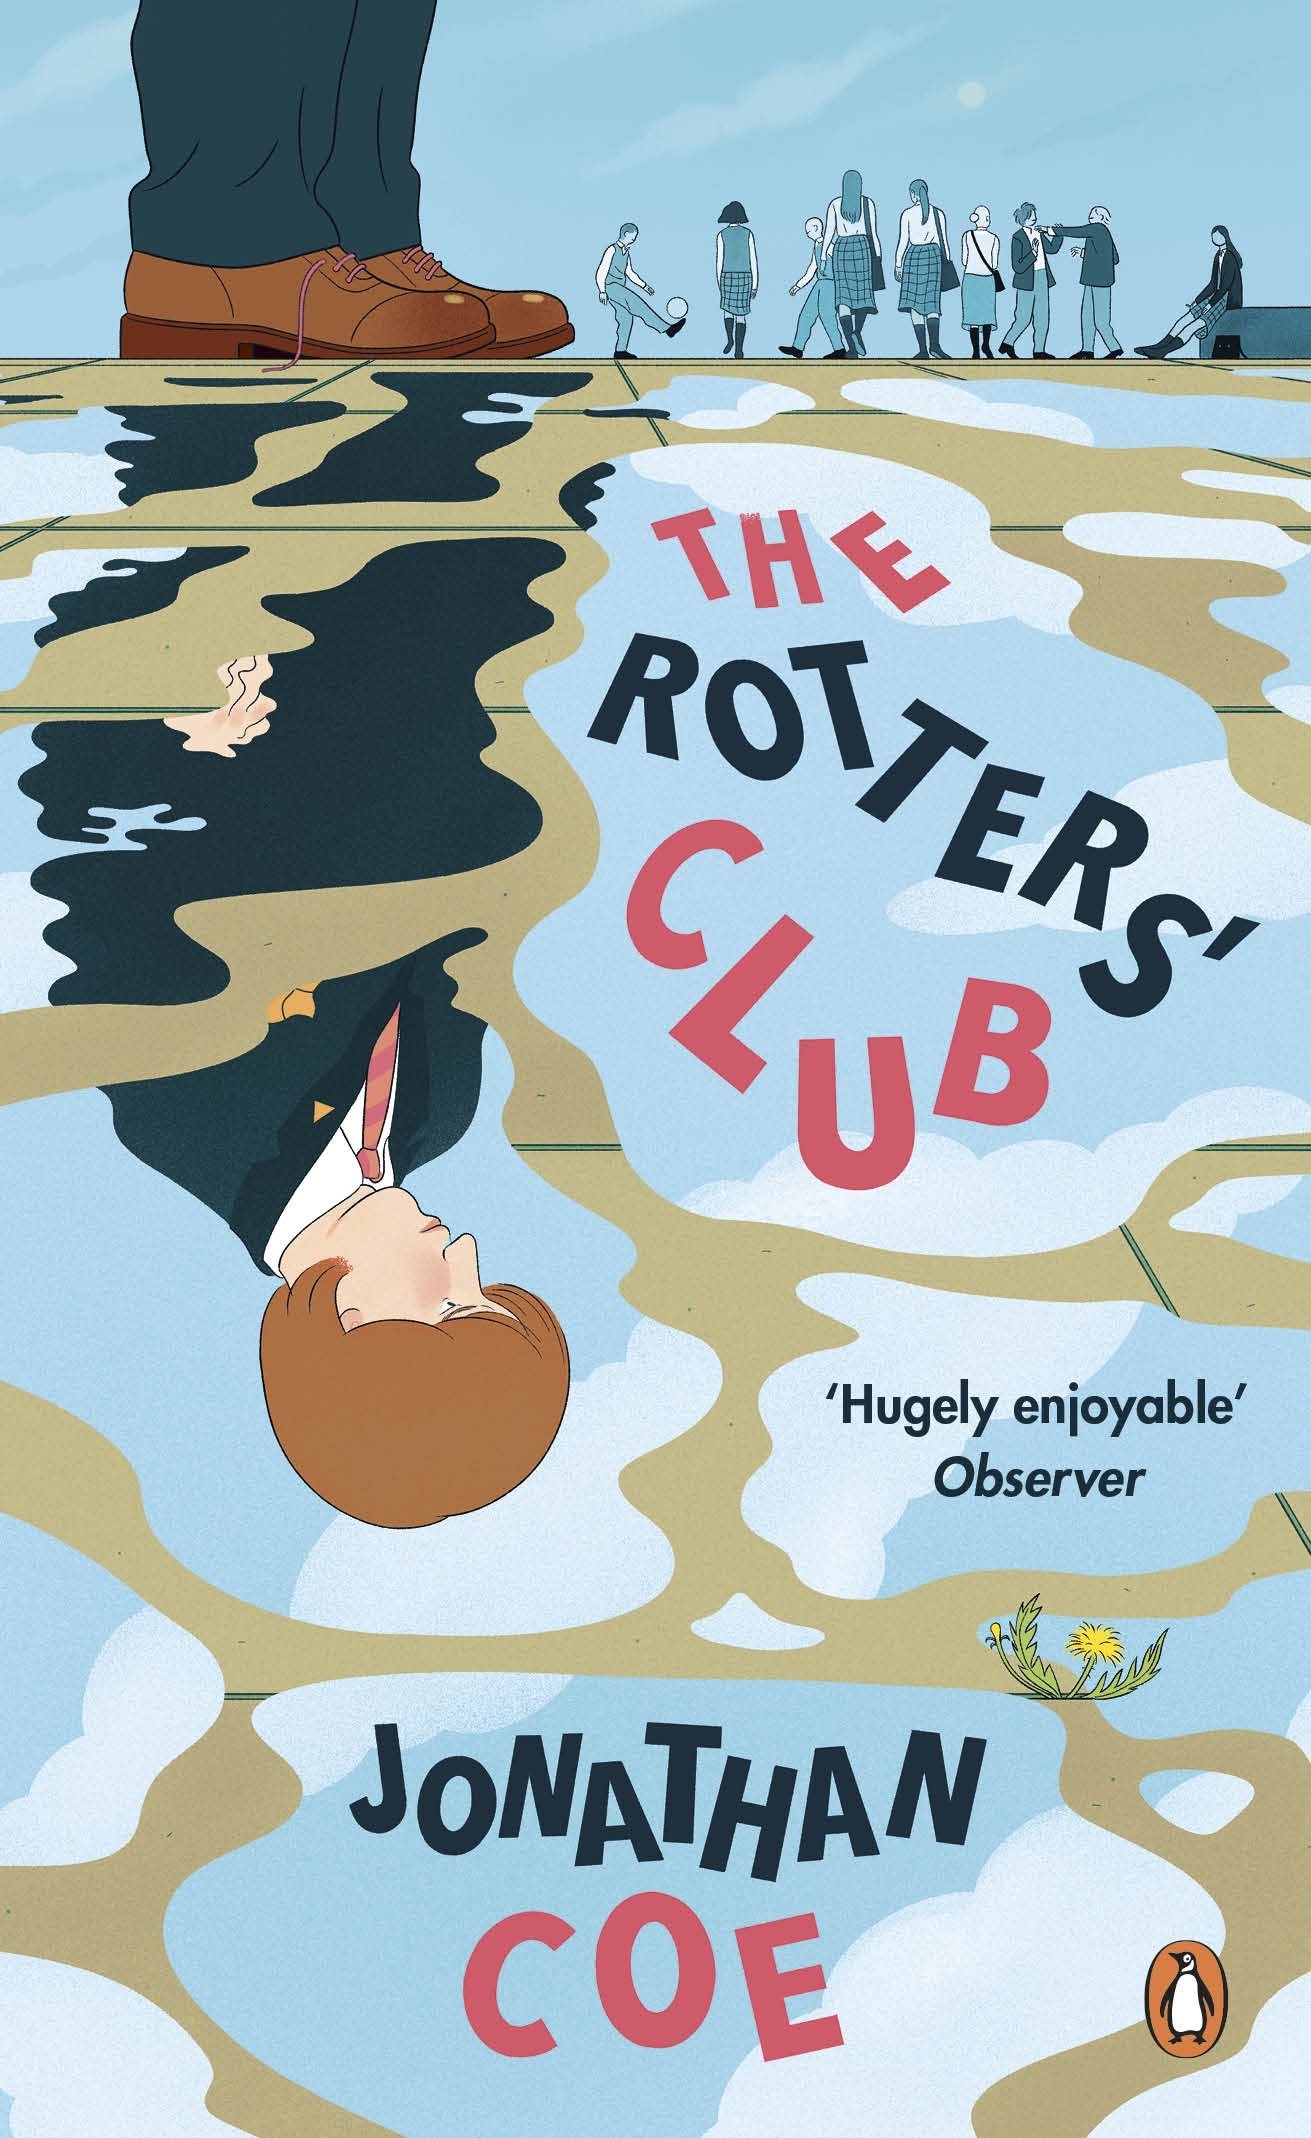 Book “The Rotters' Club” by Jonathan Coe — June 6, 2019